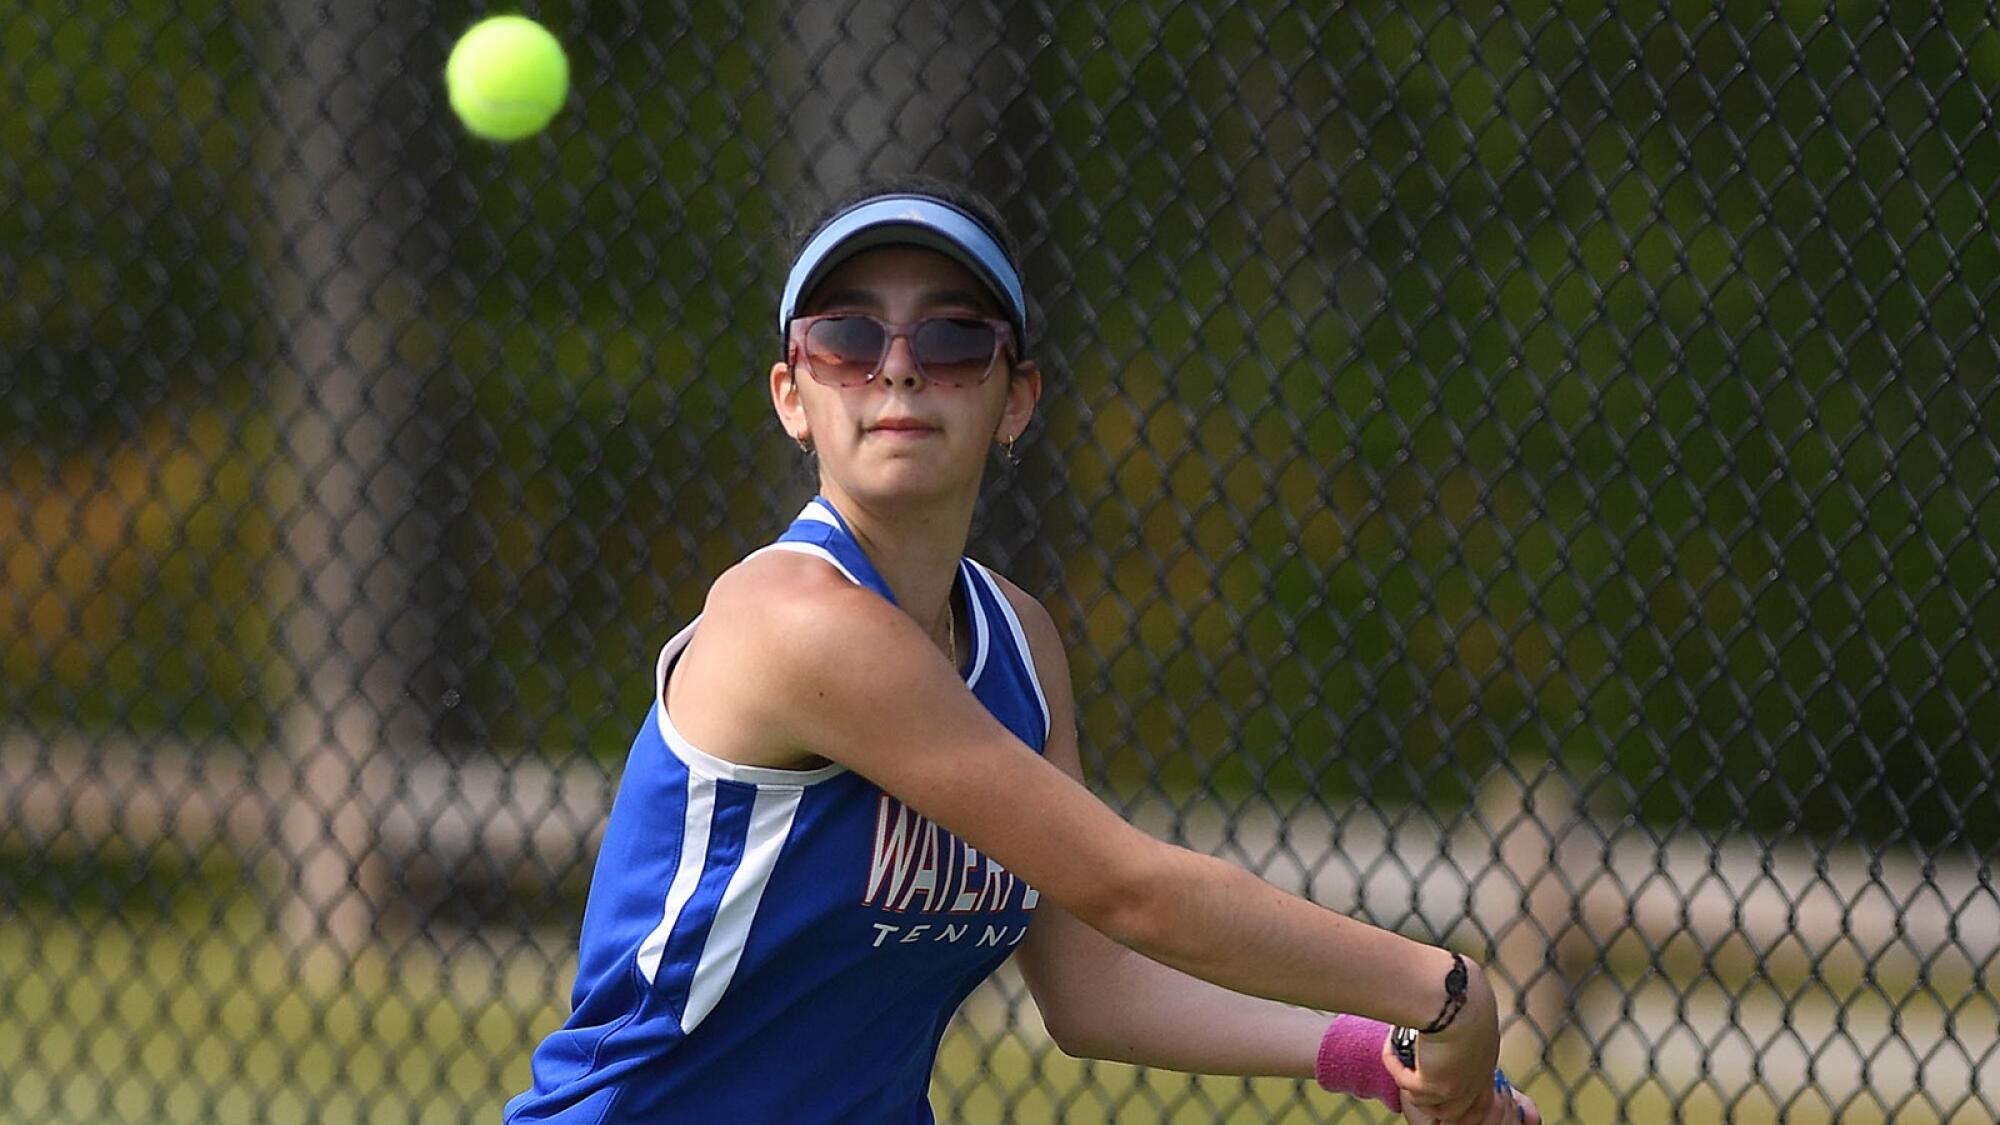 After a scare, Waterford’s Hage makes it three straight ECC singles titles